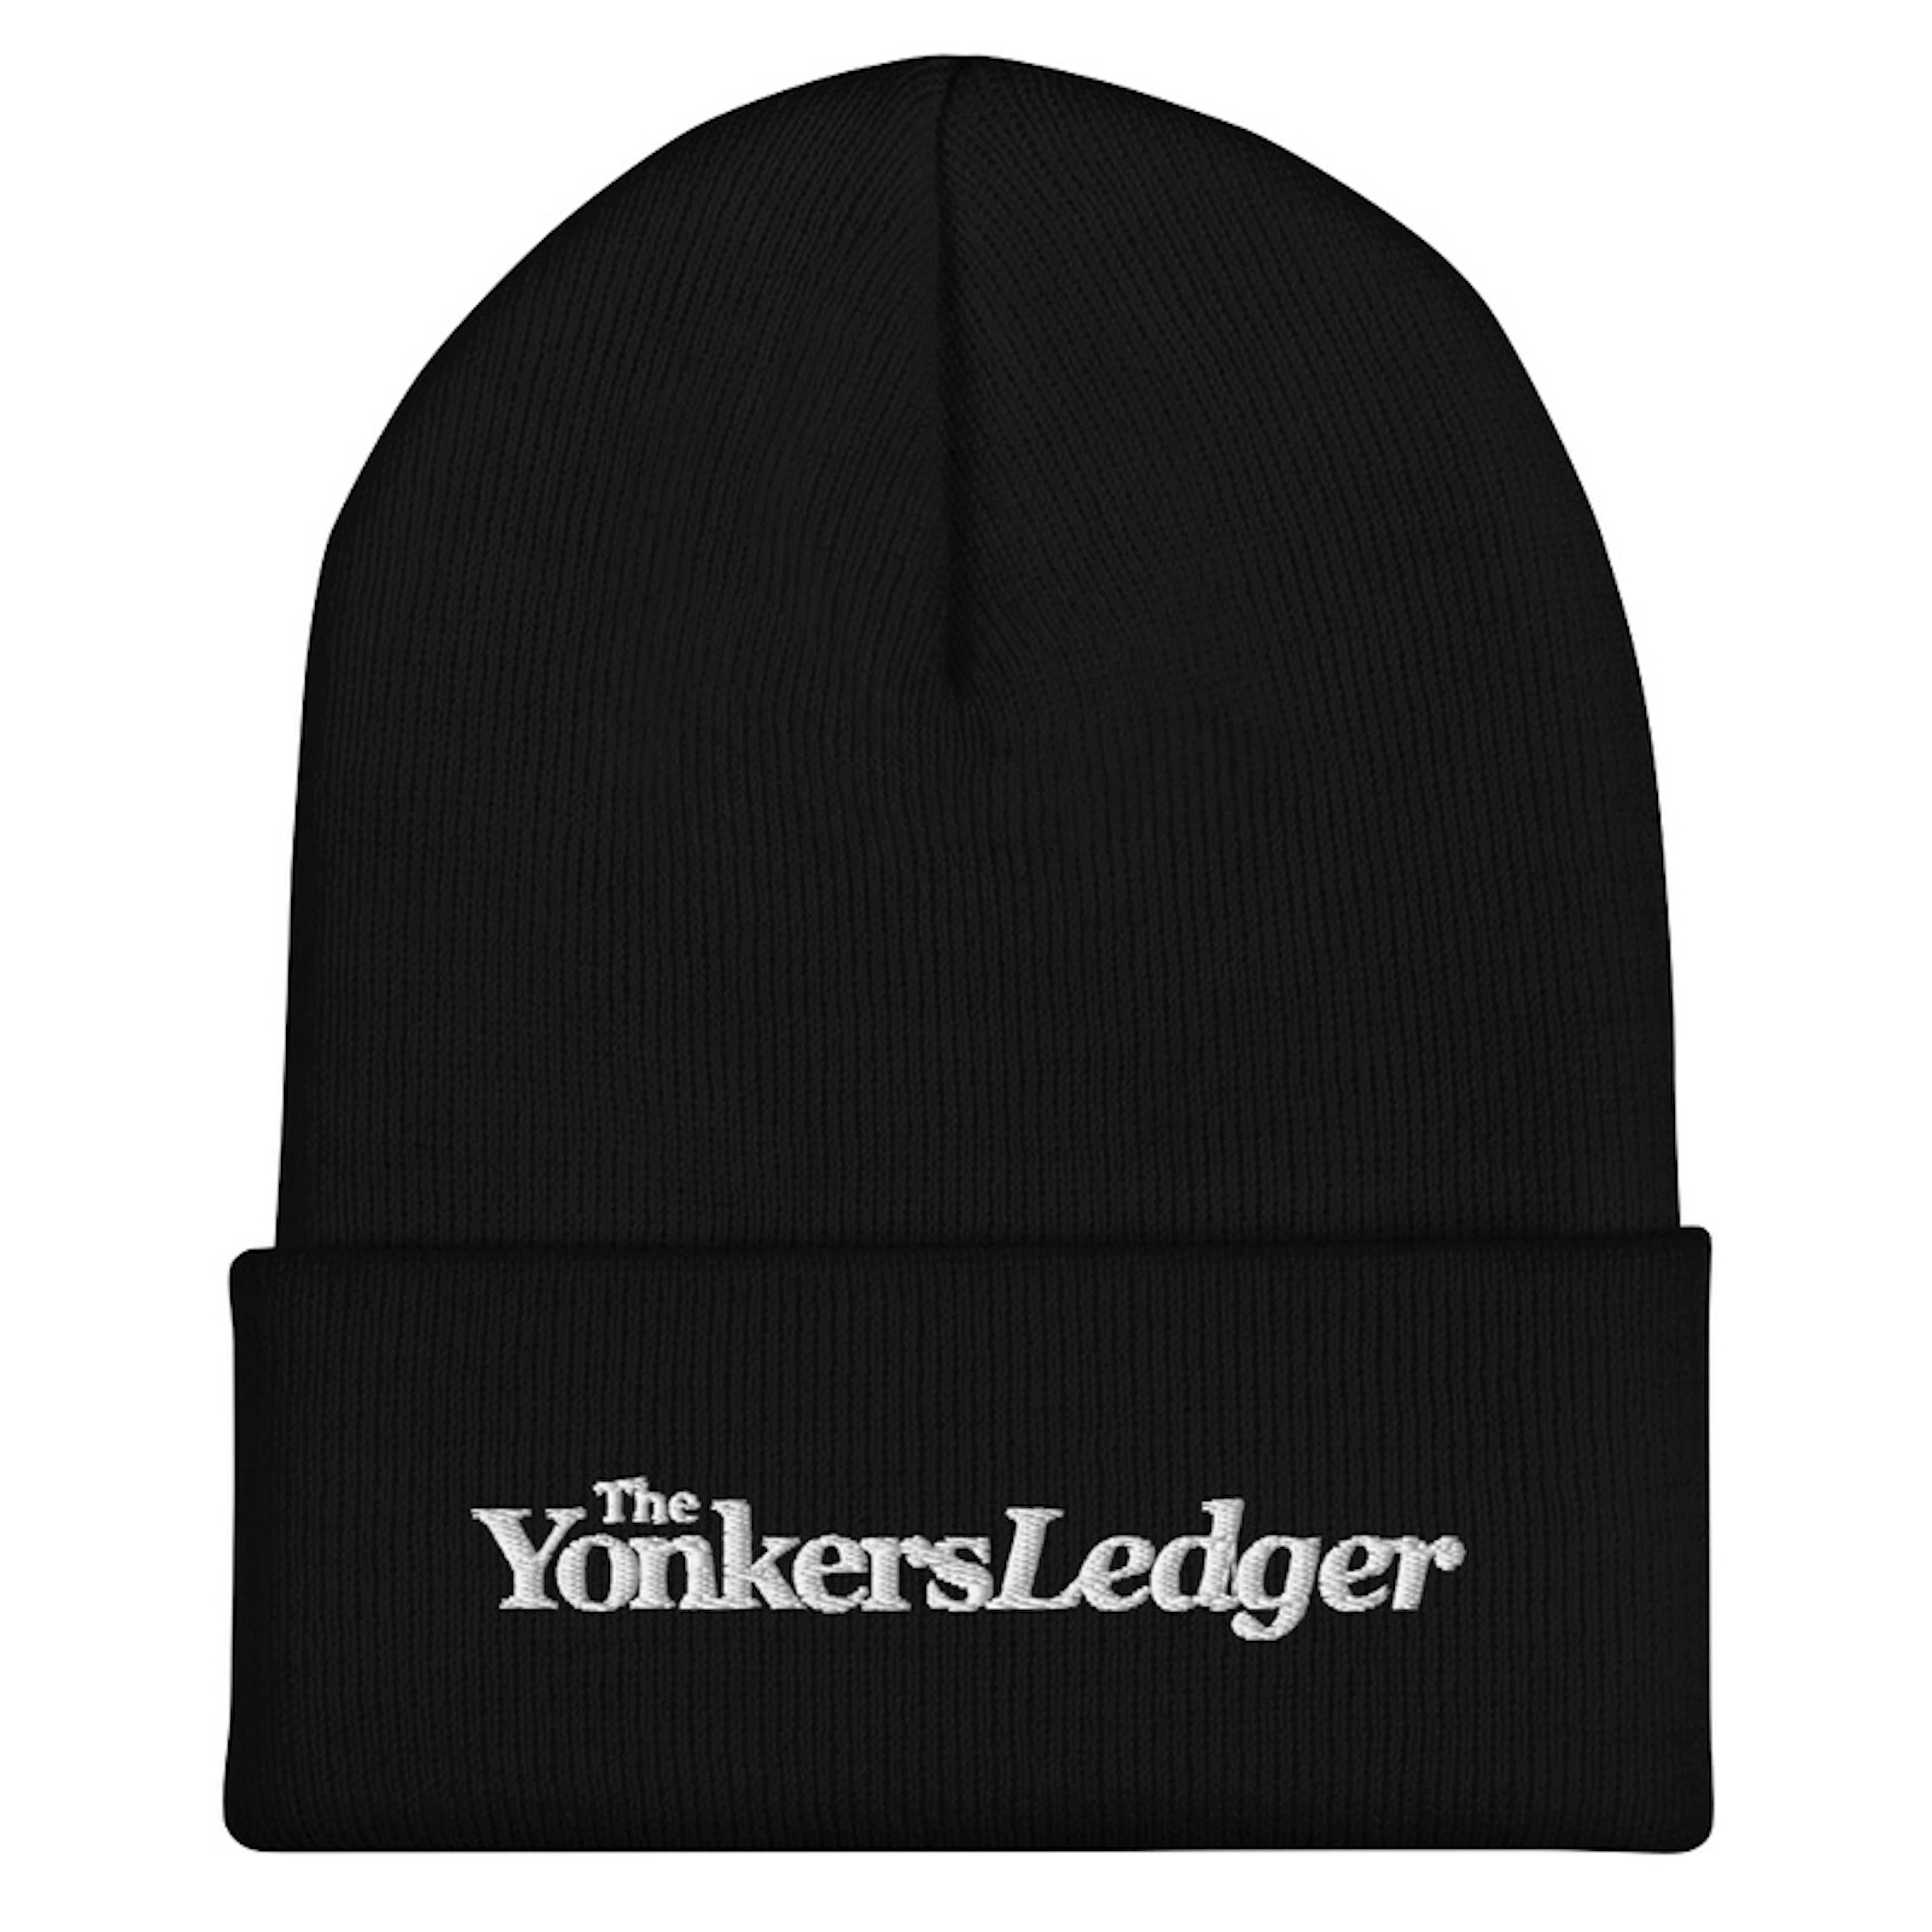 The Yonkers Ledger Beanie